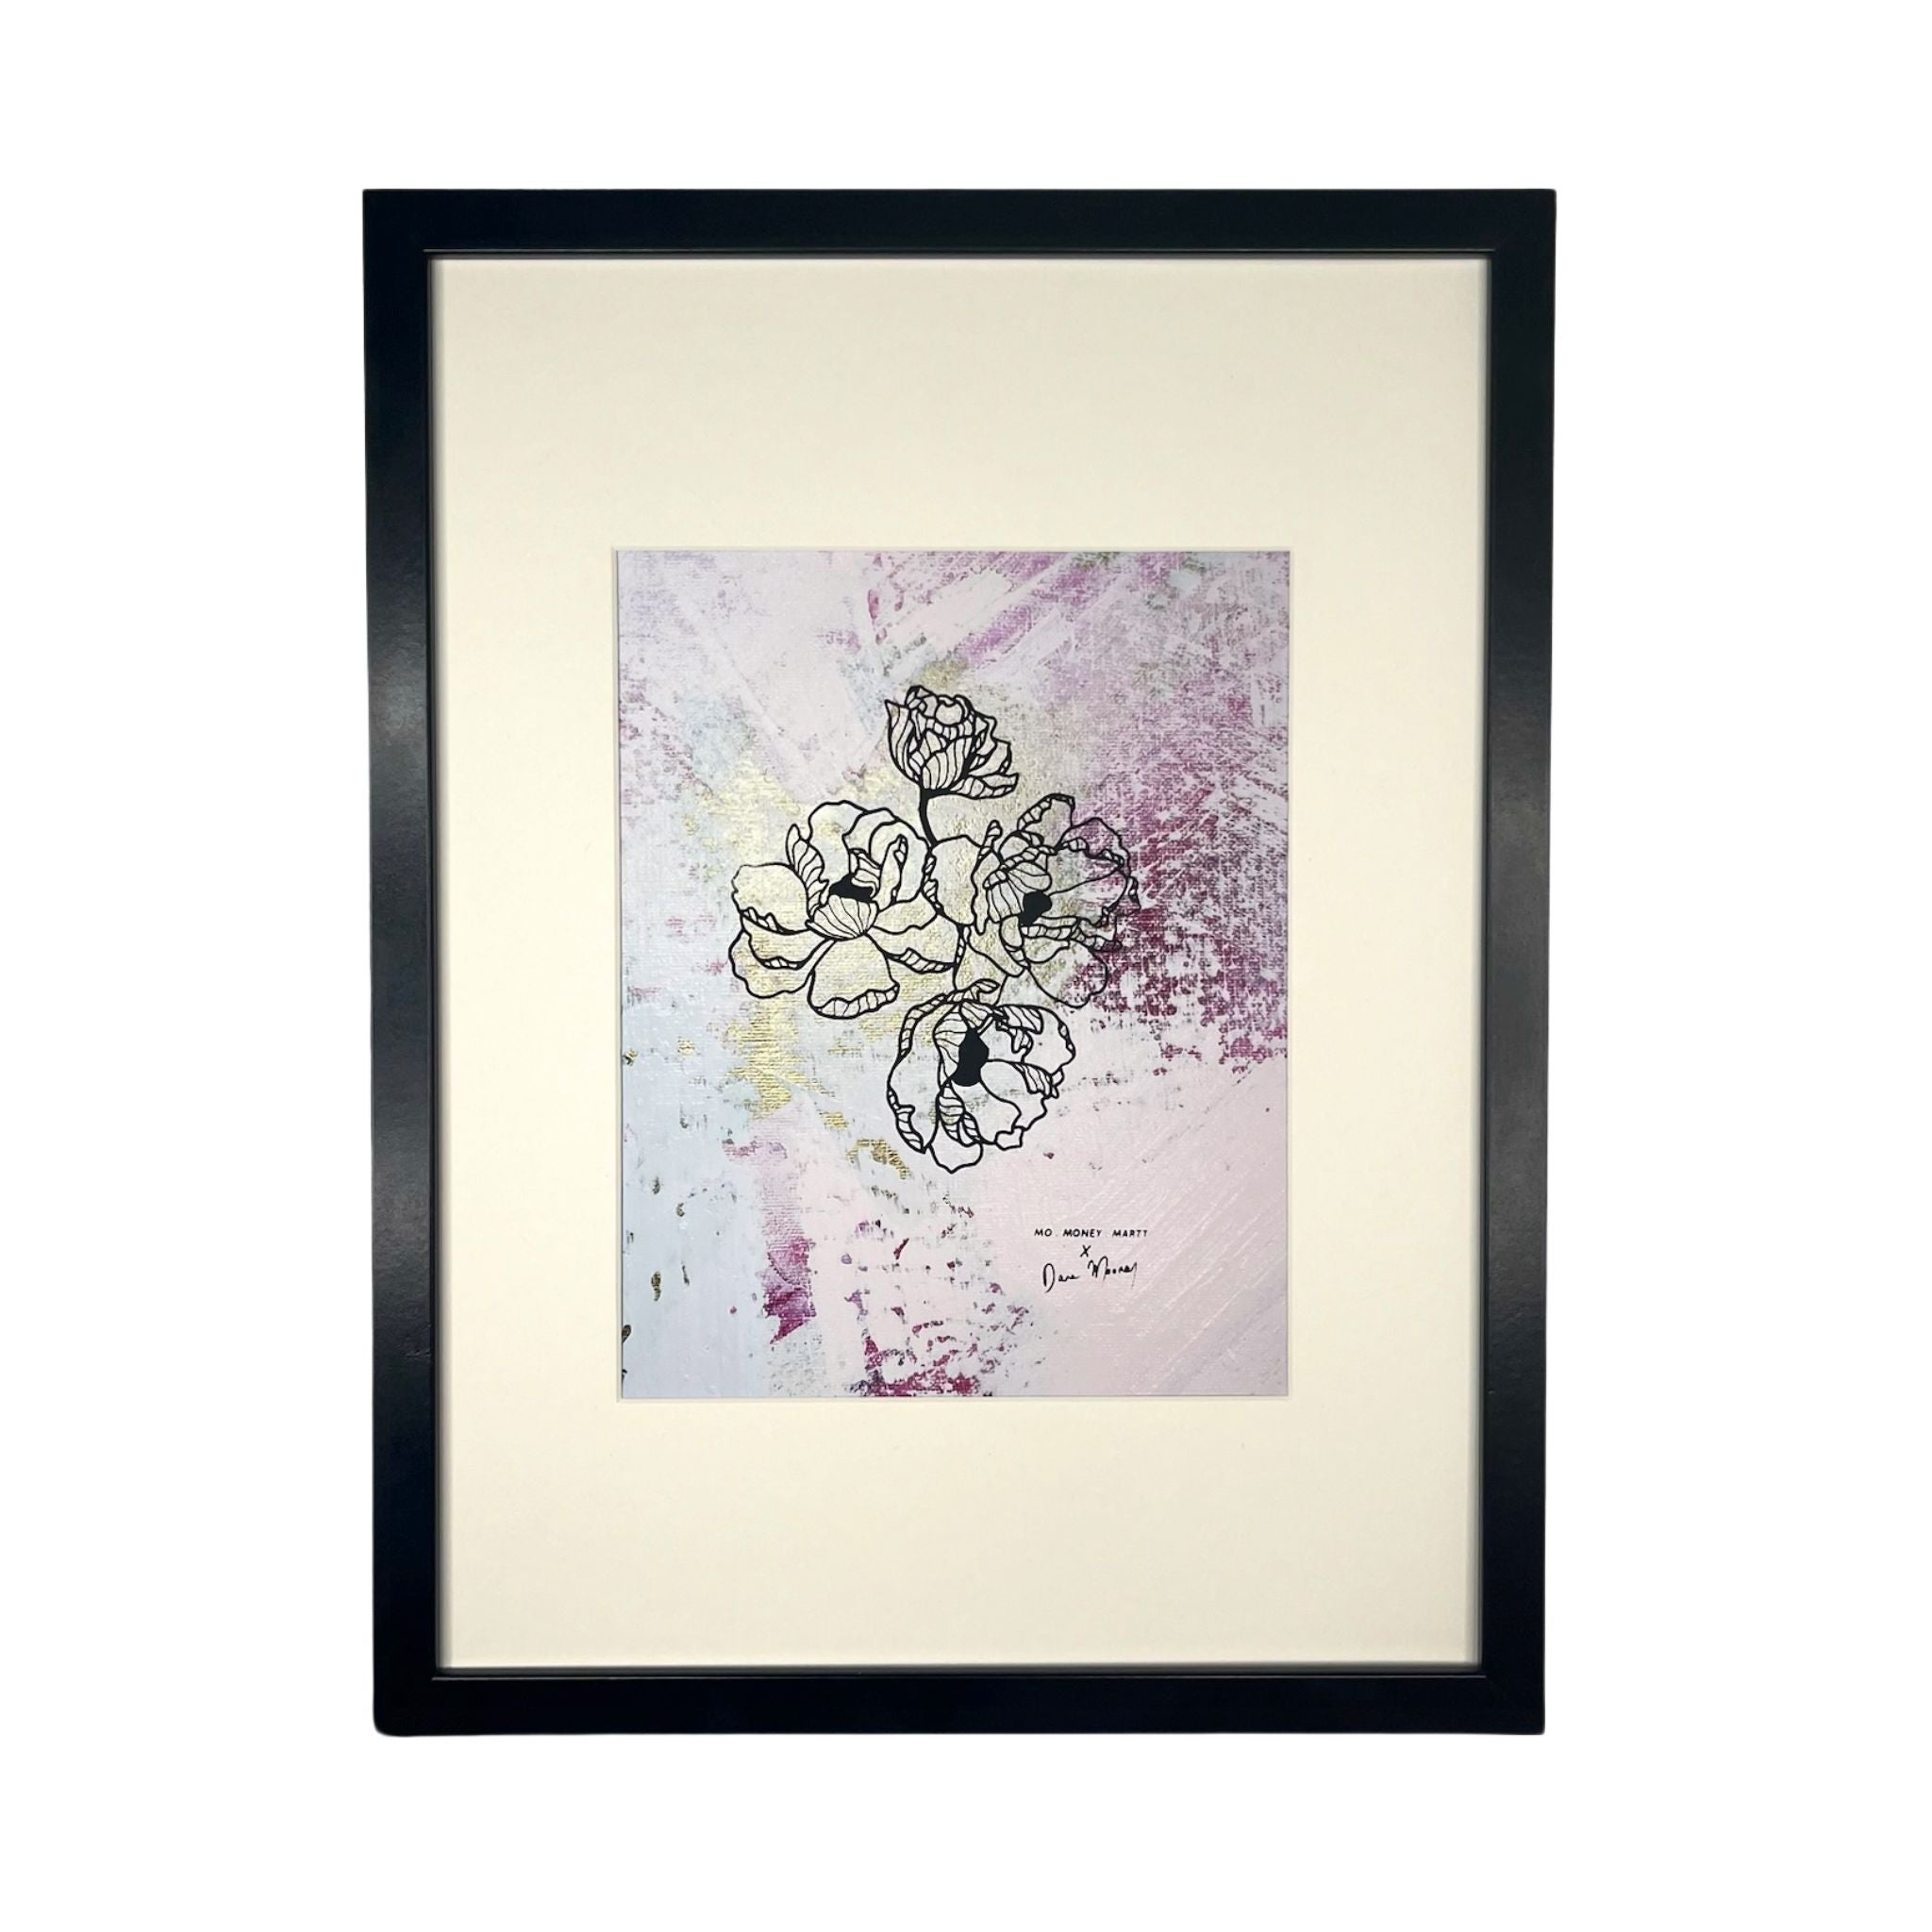 Collaboration Art Print "Melted Icing"